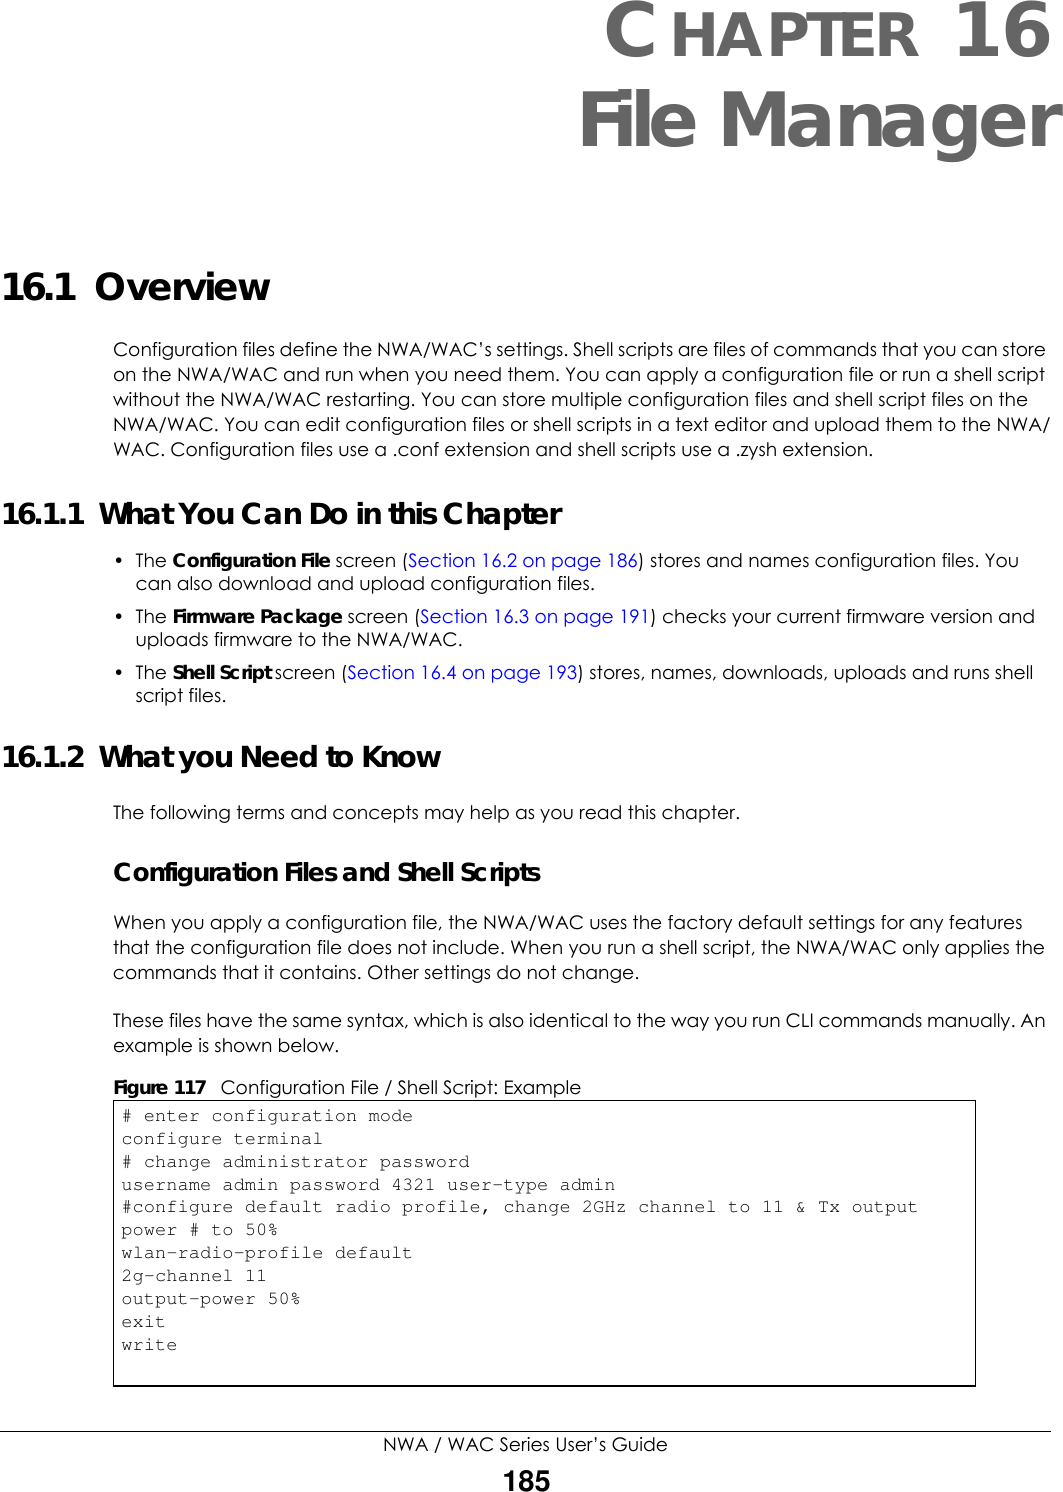 NWA / WAC Series User’s Guide185CHAPTER 16File Manager16.1  OverviewConfiguration files define the NWA/WAC’s settings. Shell scripts are files of commands that you can store on the NWA/WAC and run when you need them. You can apply a configuration file or run a shell script without the NWA/WAC restarting. You can store multiple configuration files and shell script files on the NWA/WAC. You can edit configuration files or shell scripts in a text editor and upload them to the NWA/WAC. Configuration files use a .conf extension and shell scripts use a .zysh extension.16.1.1  What You Can Do in this Chapter• The Configuration File screen (Section 16.2 on page 186) stores and names configuration files. You can also download and upload configuration files.• The Firmware Package screen (Section 16.3 on page 191) checks your current firmware version and uploads firmware to the NWA/WAC.• The Shell Script screen (Section 16.4 on page 193) stores, names, downloads, uploads and runs shell script files. 16.1.2  What you Need to KnowThe following terms and concepts may help as you read this chapter.Configuration Files and Shell ScriptsWhen you apply a configuration file, the NWA/WAC uses the factory default settings for any features that the configuration file does not include. When you run a shell script, the NWA/WAC only applies the commands that it contains. Other settings do not change.These files have the same syntax, which is also identical to the way you run CLI commands manually. An example is shown below.  Figure 117   Configuration File / Shell Script: Example# enter configuration modeconfigure terminal# change administrator passwordusername admin password 4321 user-type admin#configure default radio profile, change 2GHz channel to 11 &amp; Tx output power # to 50%wlan-radio-profile default2g-channel 11output-power 50%exitwrite